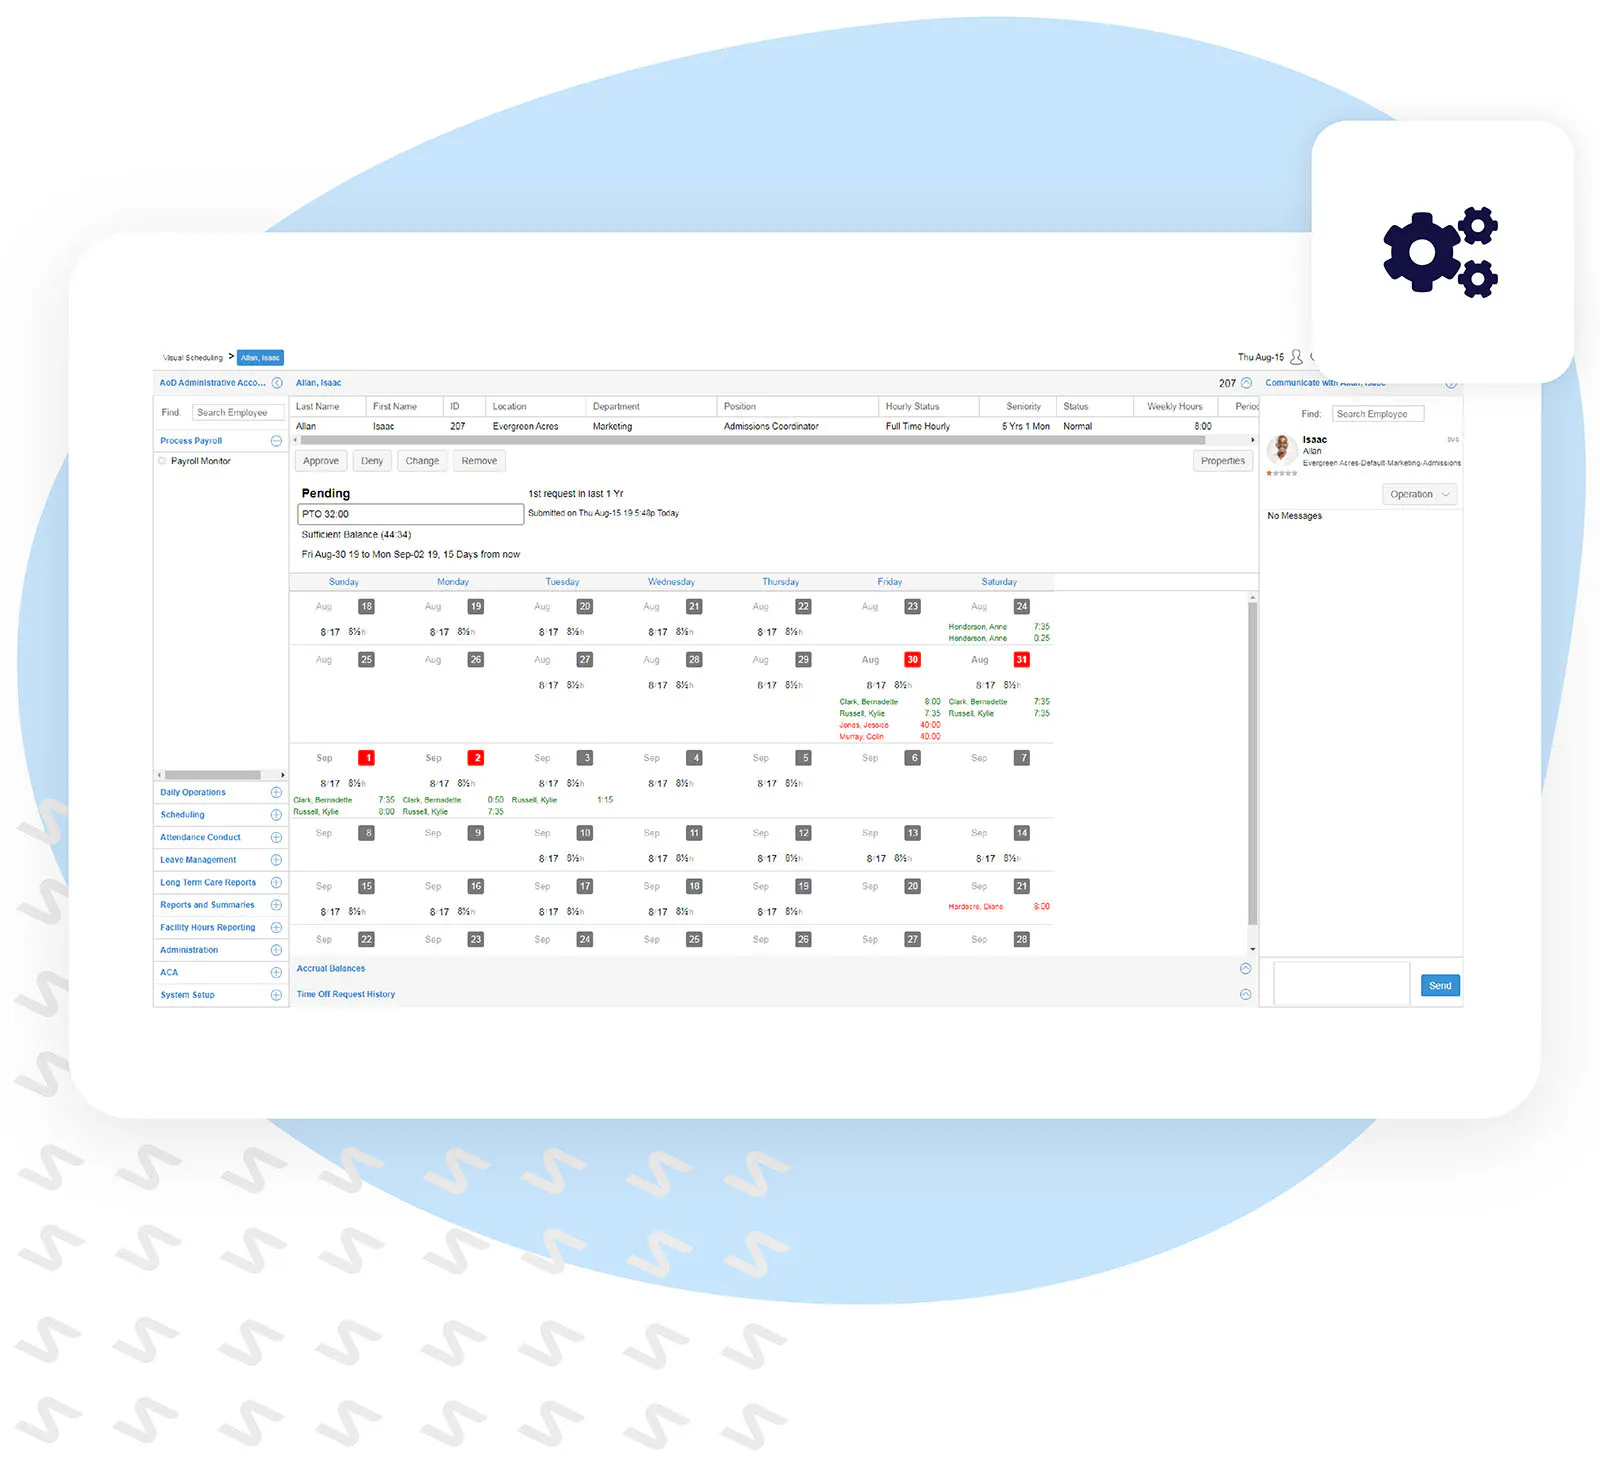 Time and Labor Management dashboard